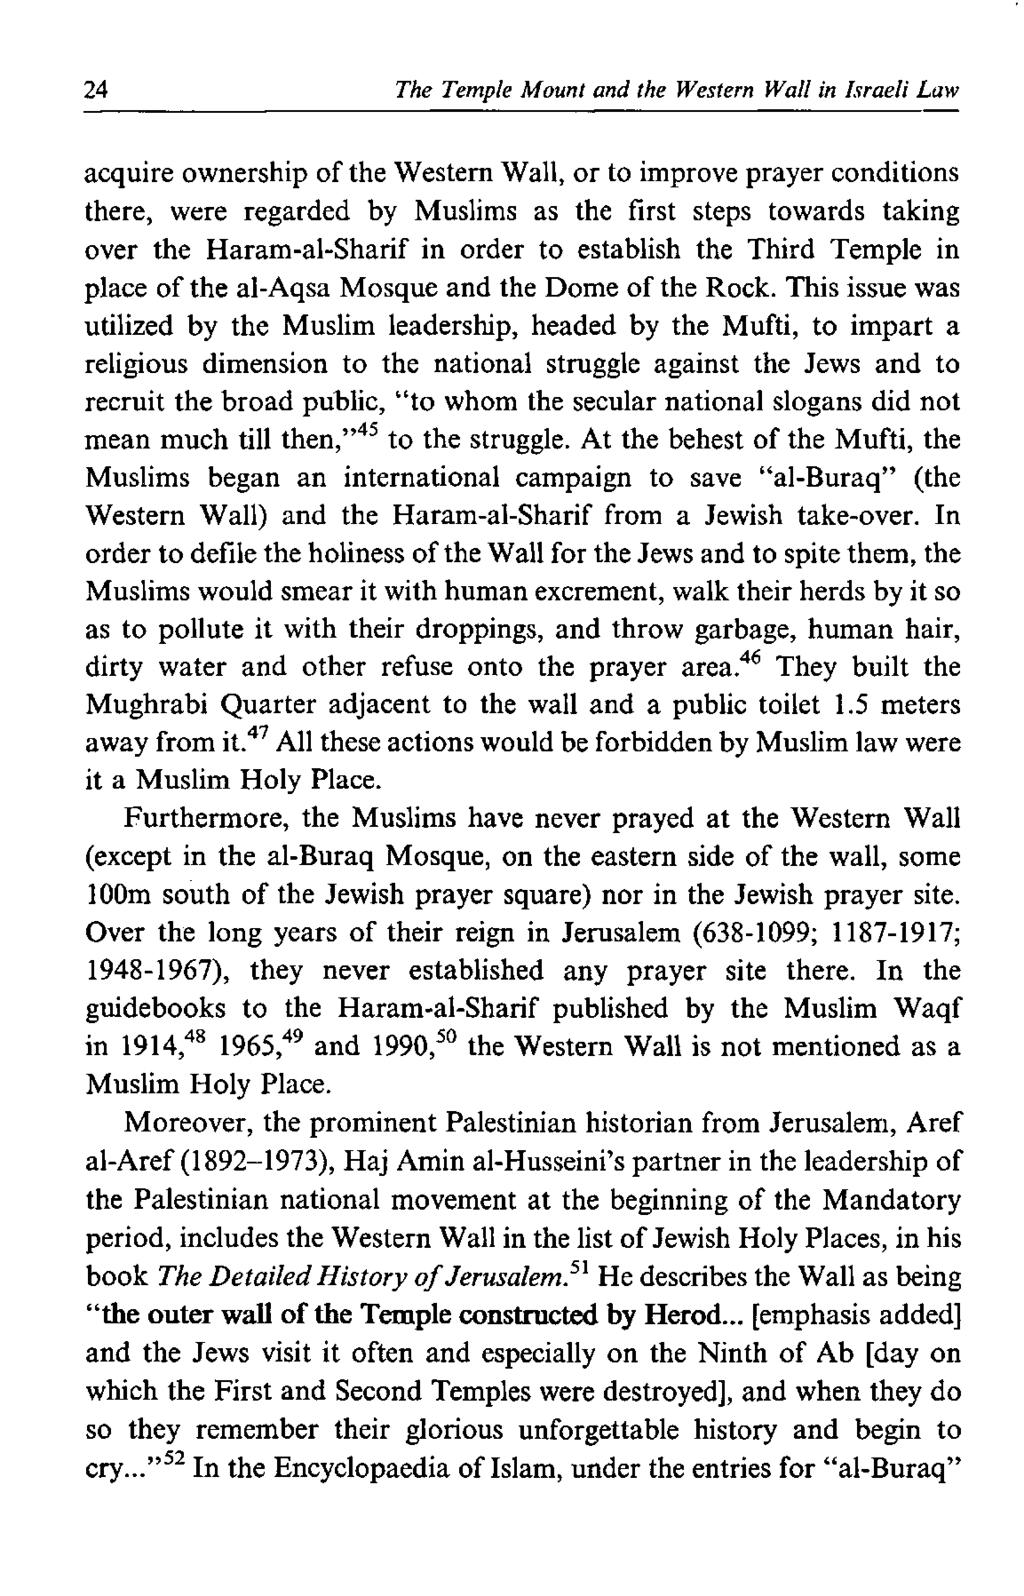 24 The Temple Mount and the Western Wall in Israeli Law acquire ownership of the Western Wall, or to improve prayer conditions there, were regarded by Muslims as the first steps towards taking over